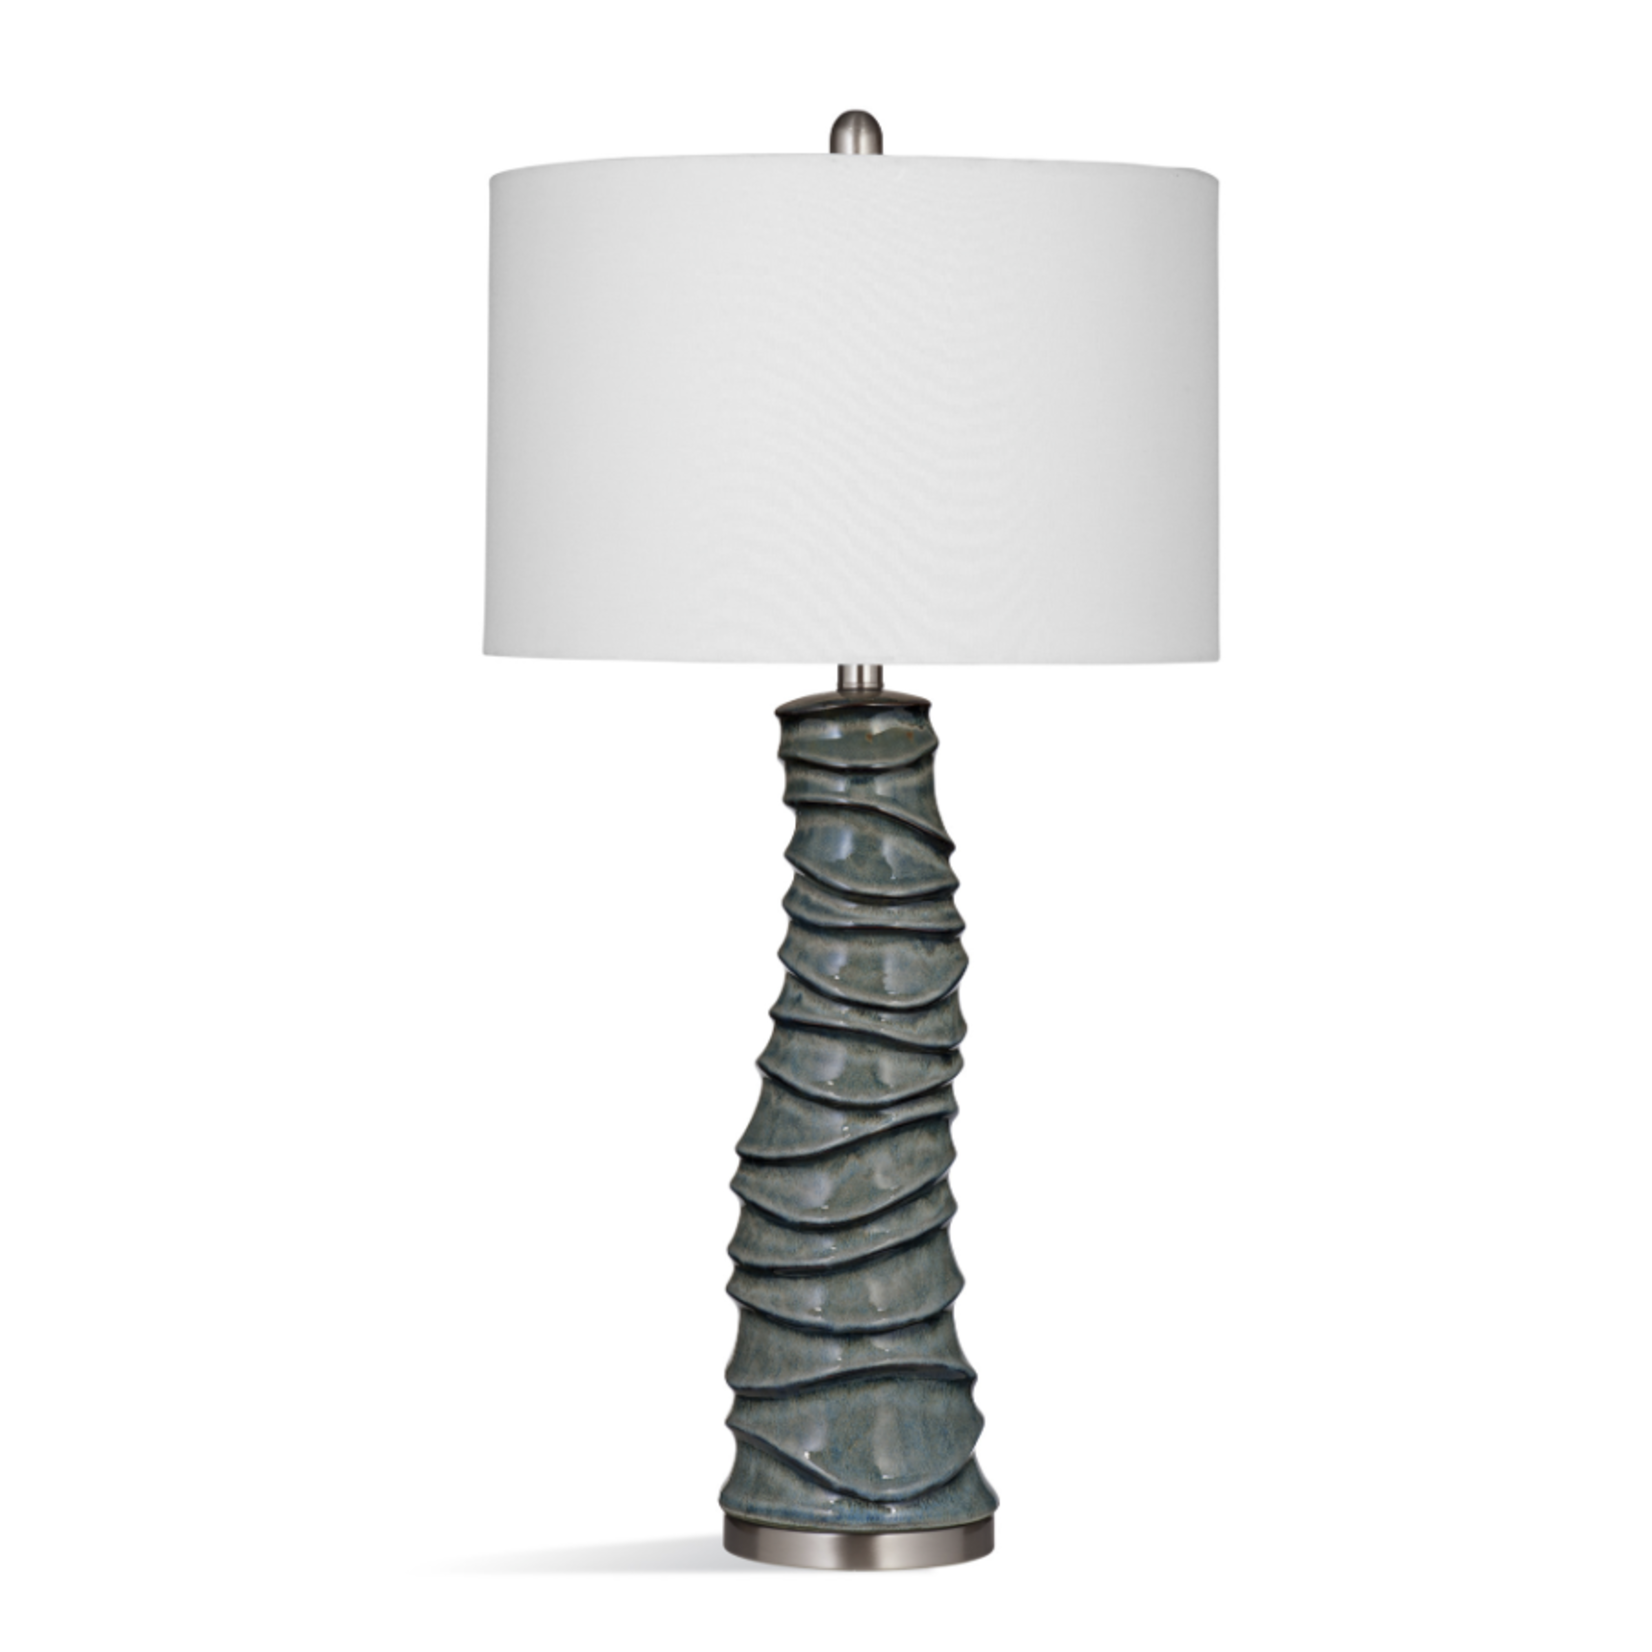 Outside The Box 31" Gallie Blue Crackle Ceramic Table Lamp